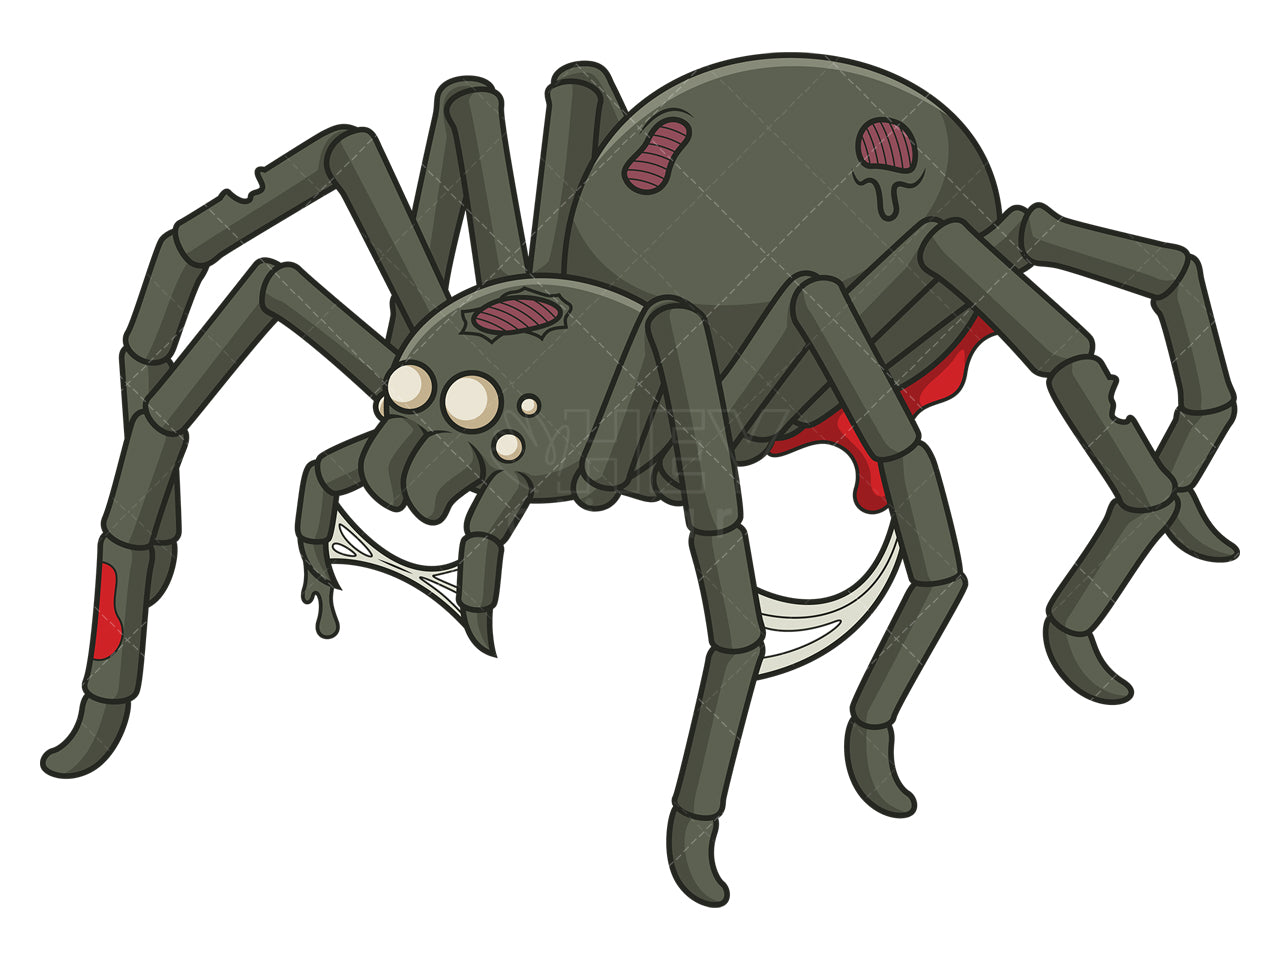 Royalty-free stock vector illustration of a creepy zombie spider.